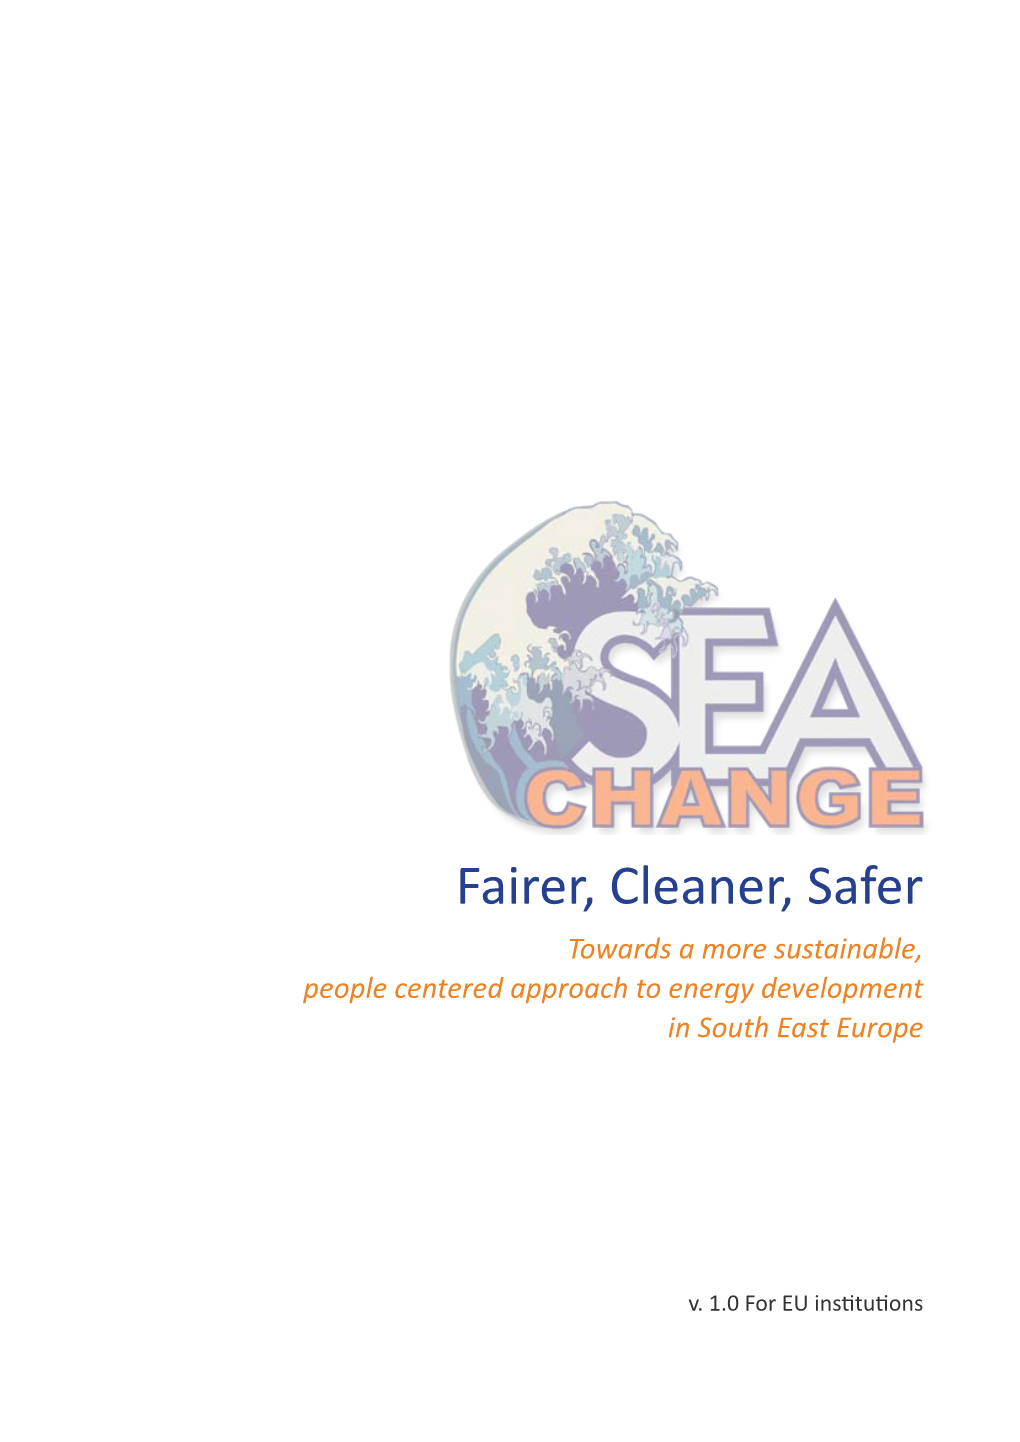 Fairer, Cleaner, Safer Towards a More Sustainable, People Centered Approach to Energy Development in South East Europe